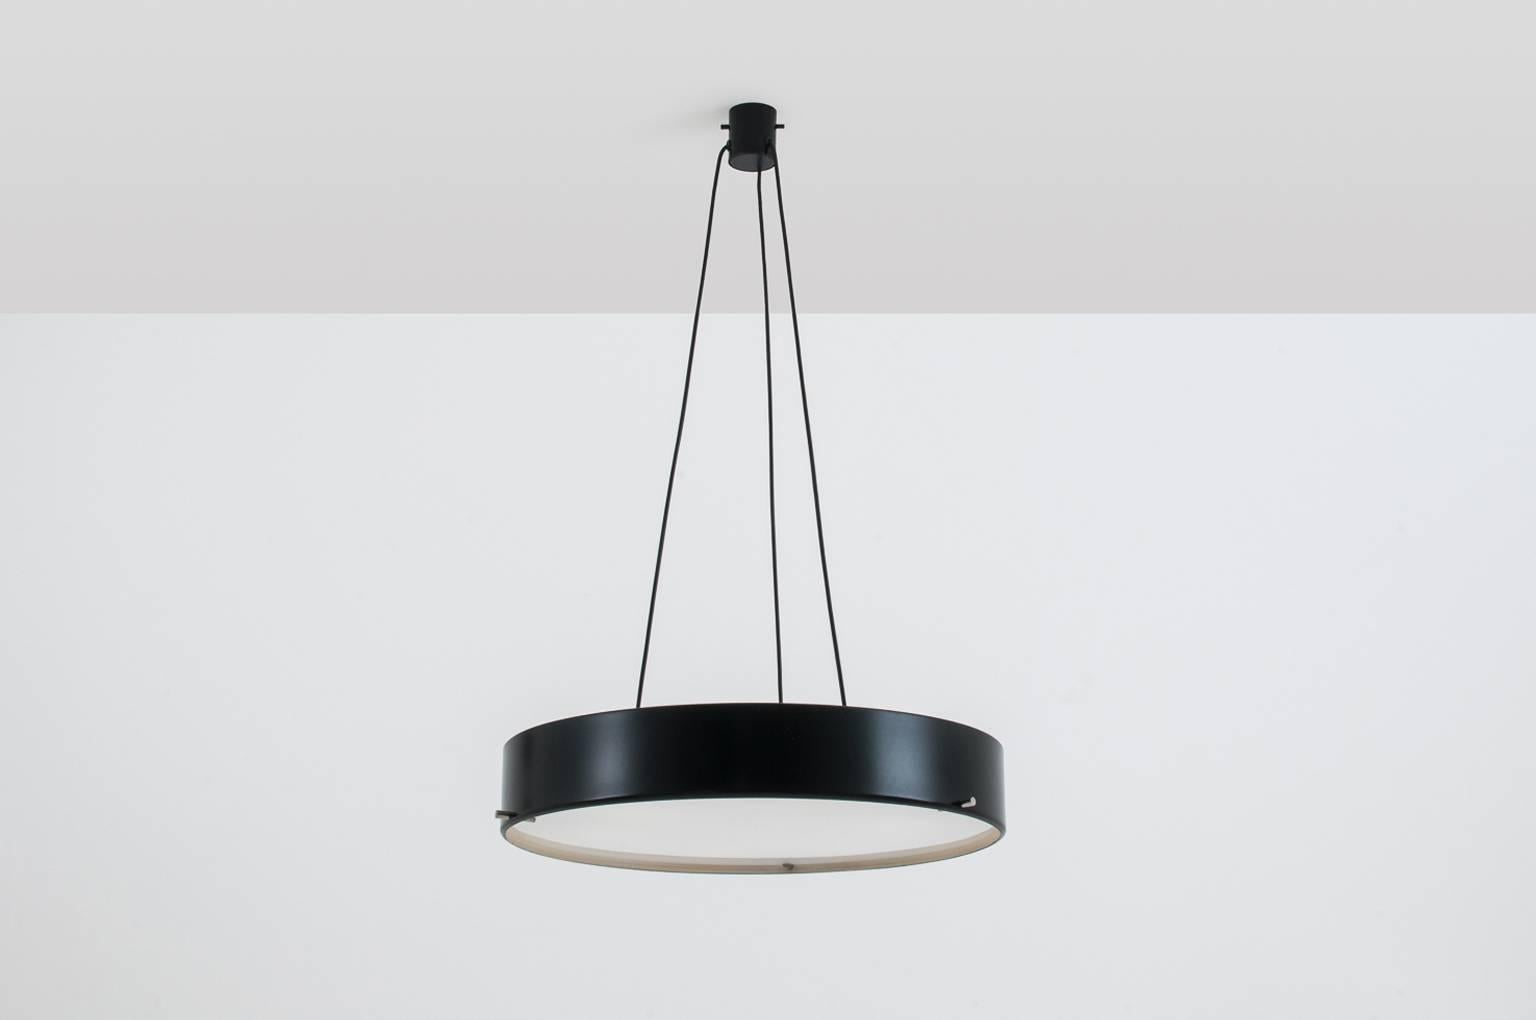 Sophisticated ceiling light ‘1090’ by Bruno Gatta for Stilnovo, Italy, 1954. Beautiful circular form made out of black lacquered aluminium, nickel details and opaline glass. The lamp provides a good light due to the six E-27 light sockets. The